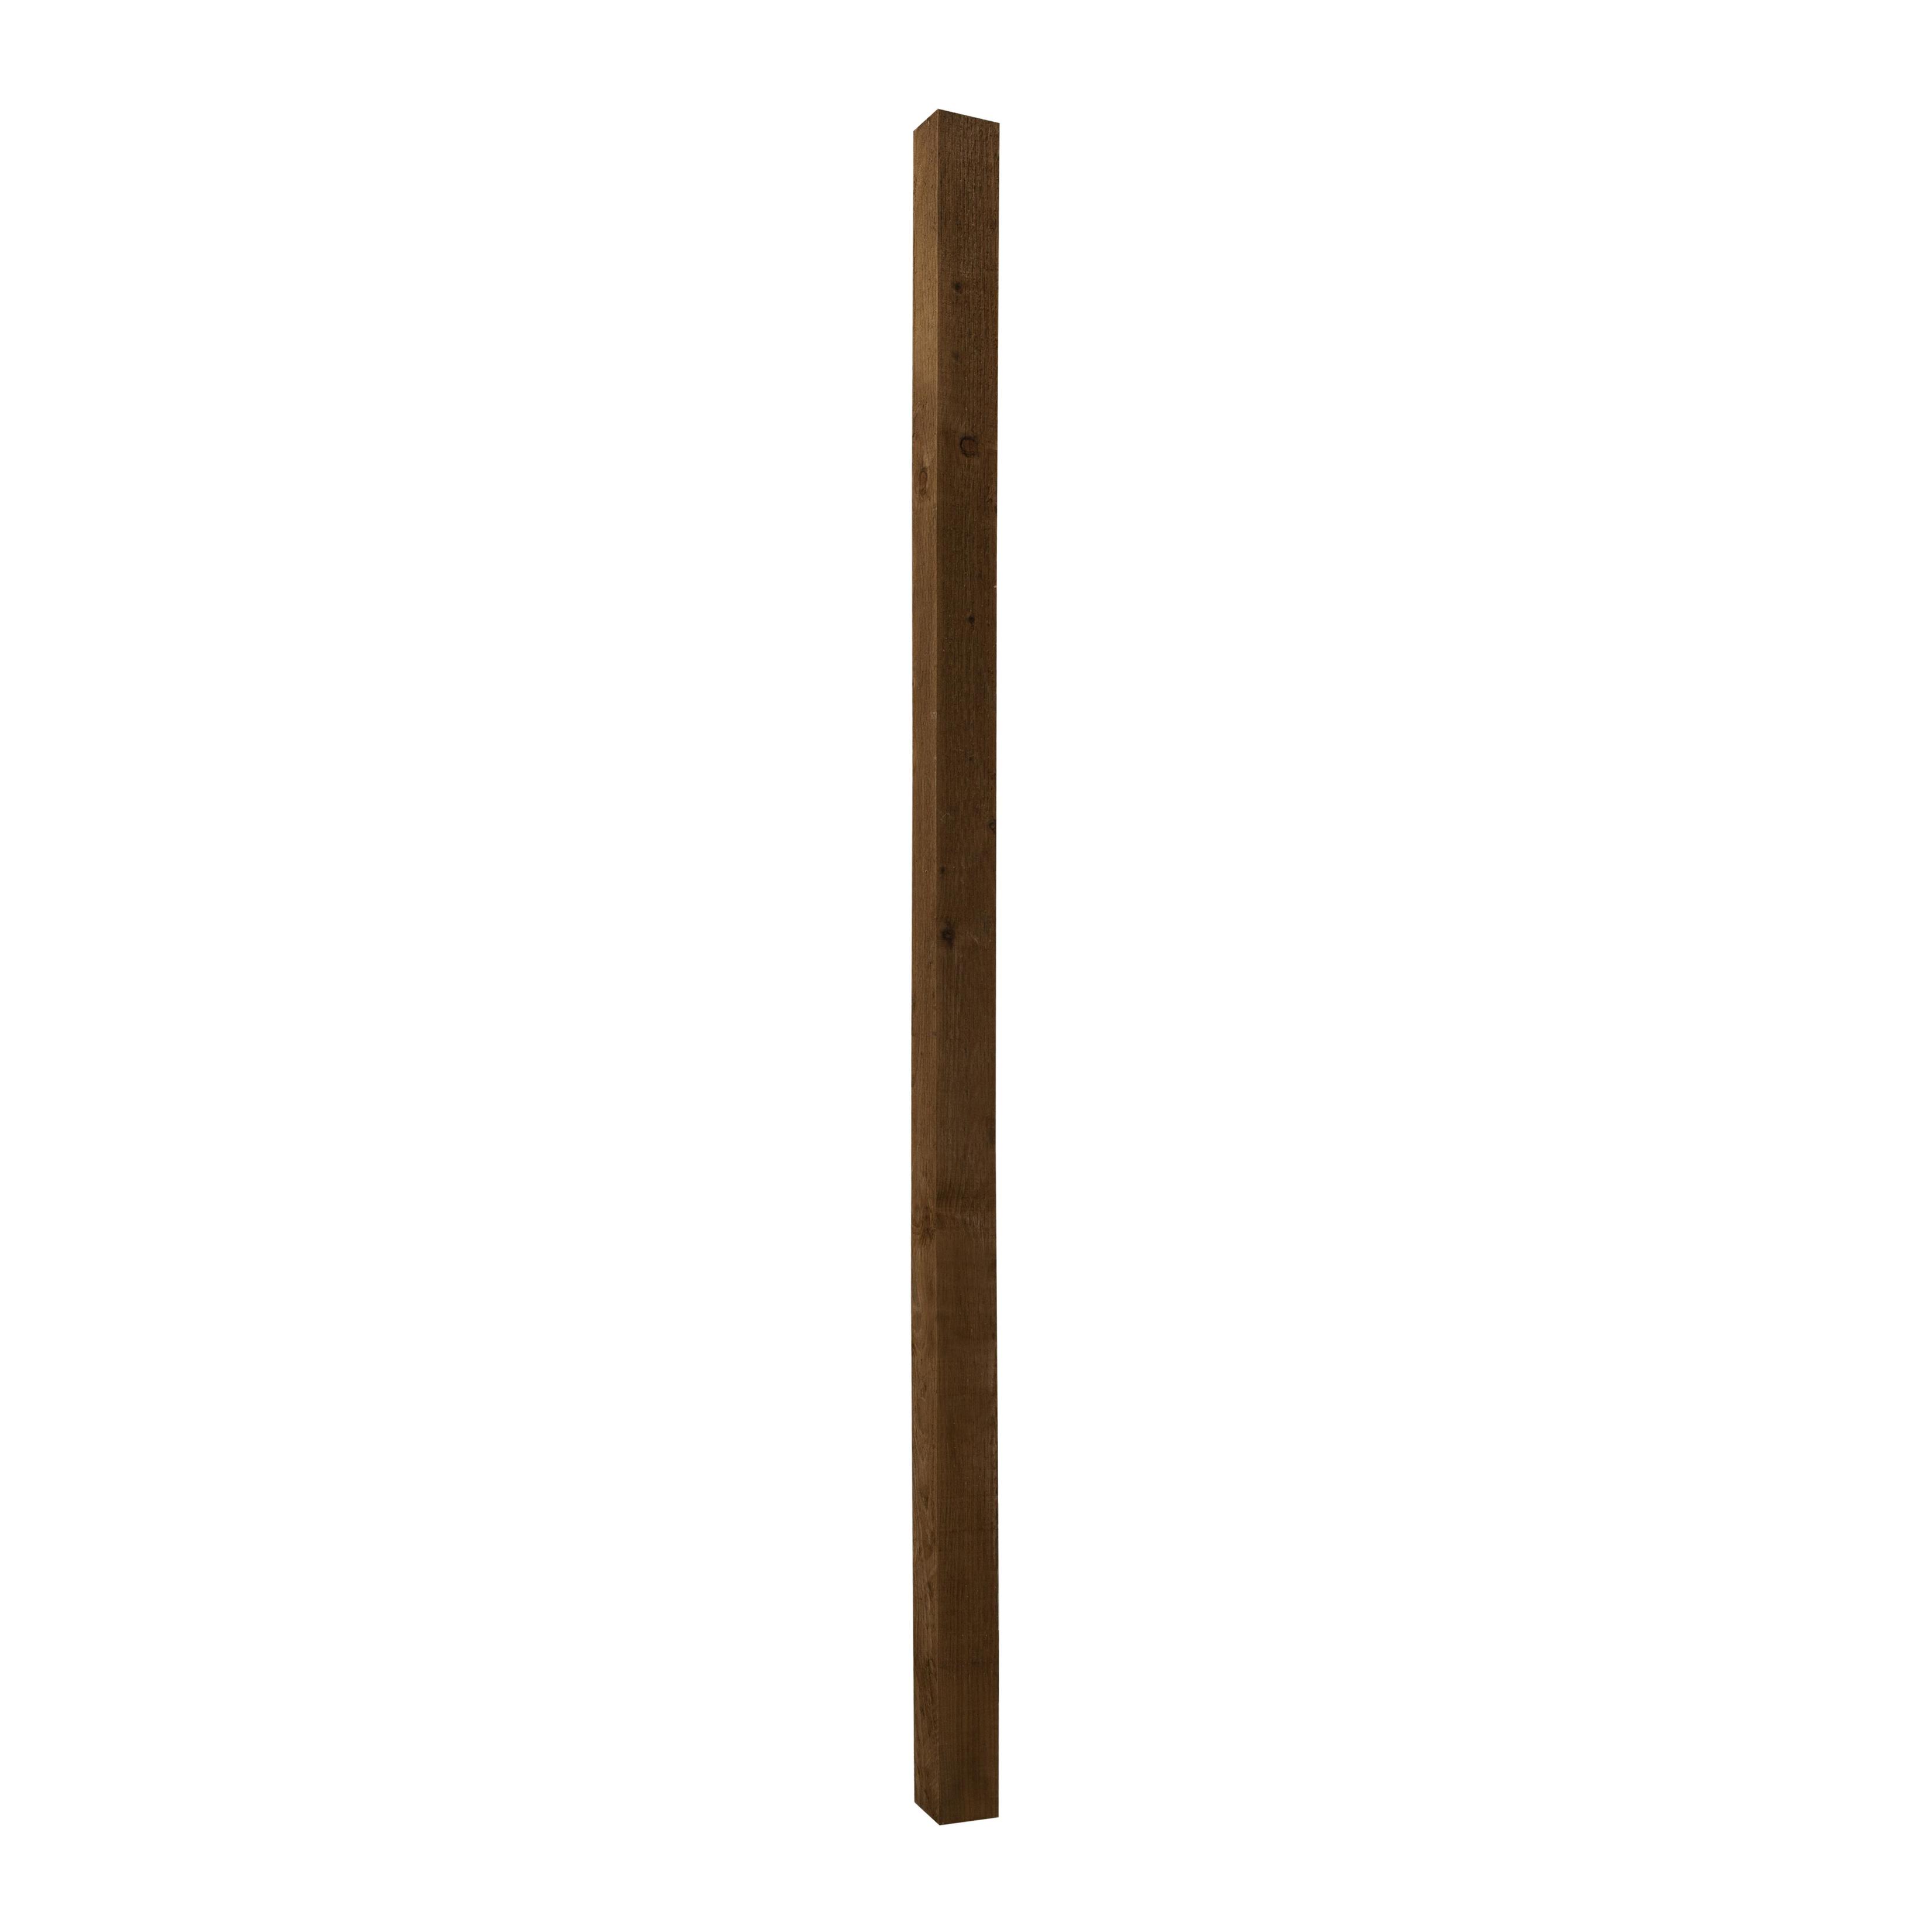 UC4 Brown Square Wooden Fence post (H)2.1m (W)75mm, Pack of 3 offers at £73123 in B&Q